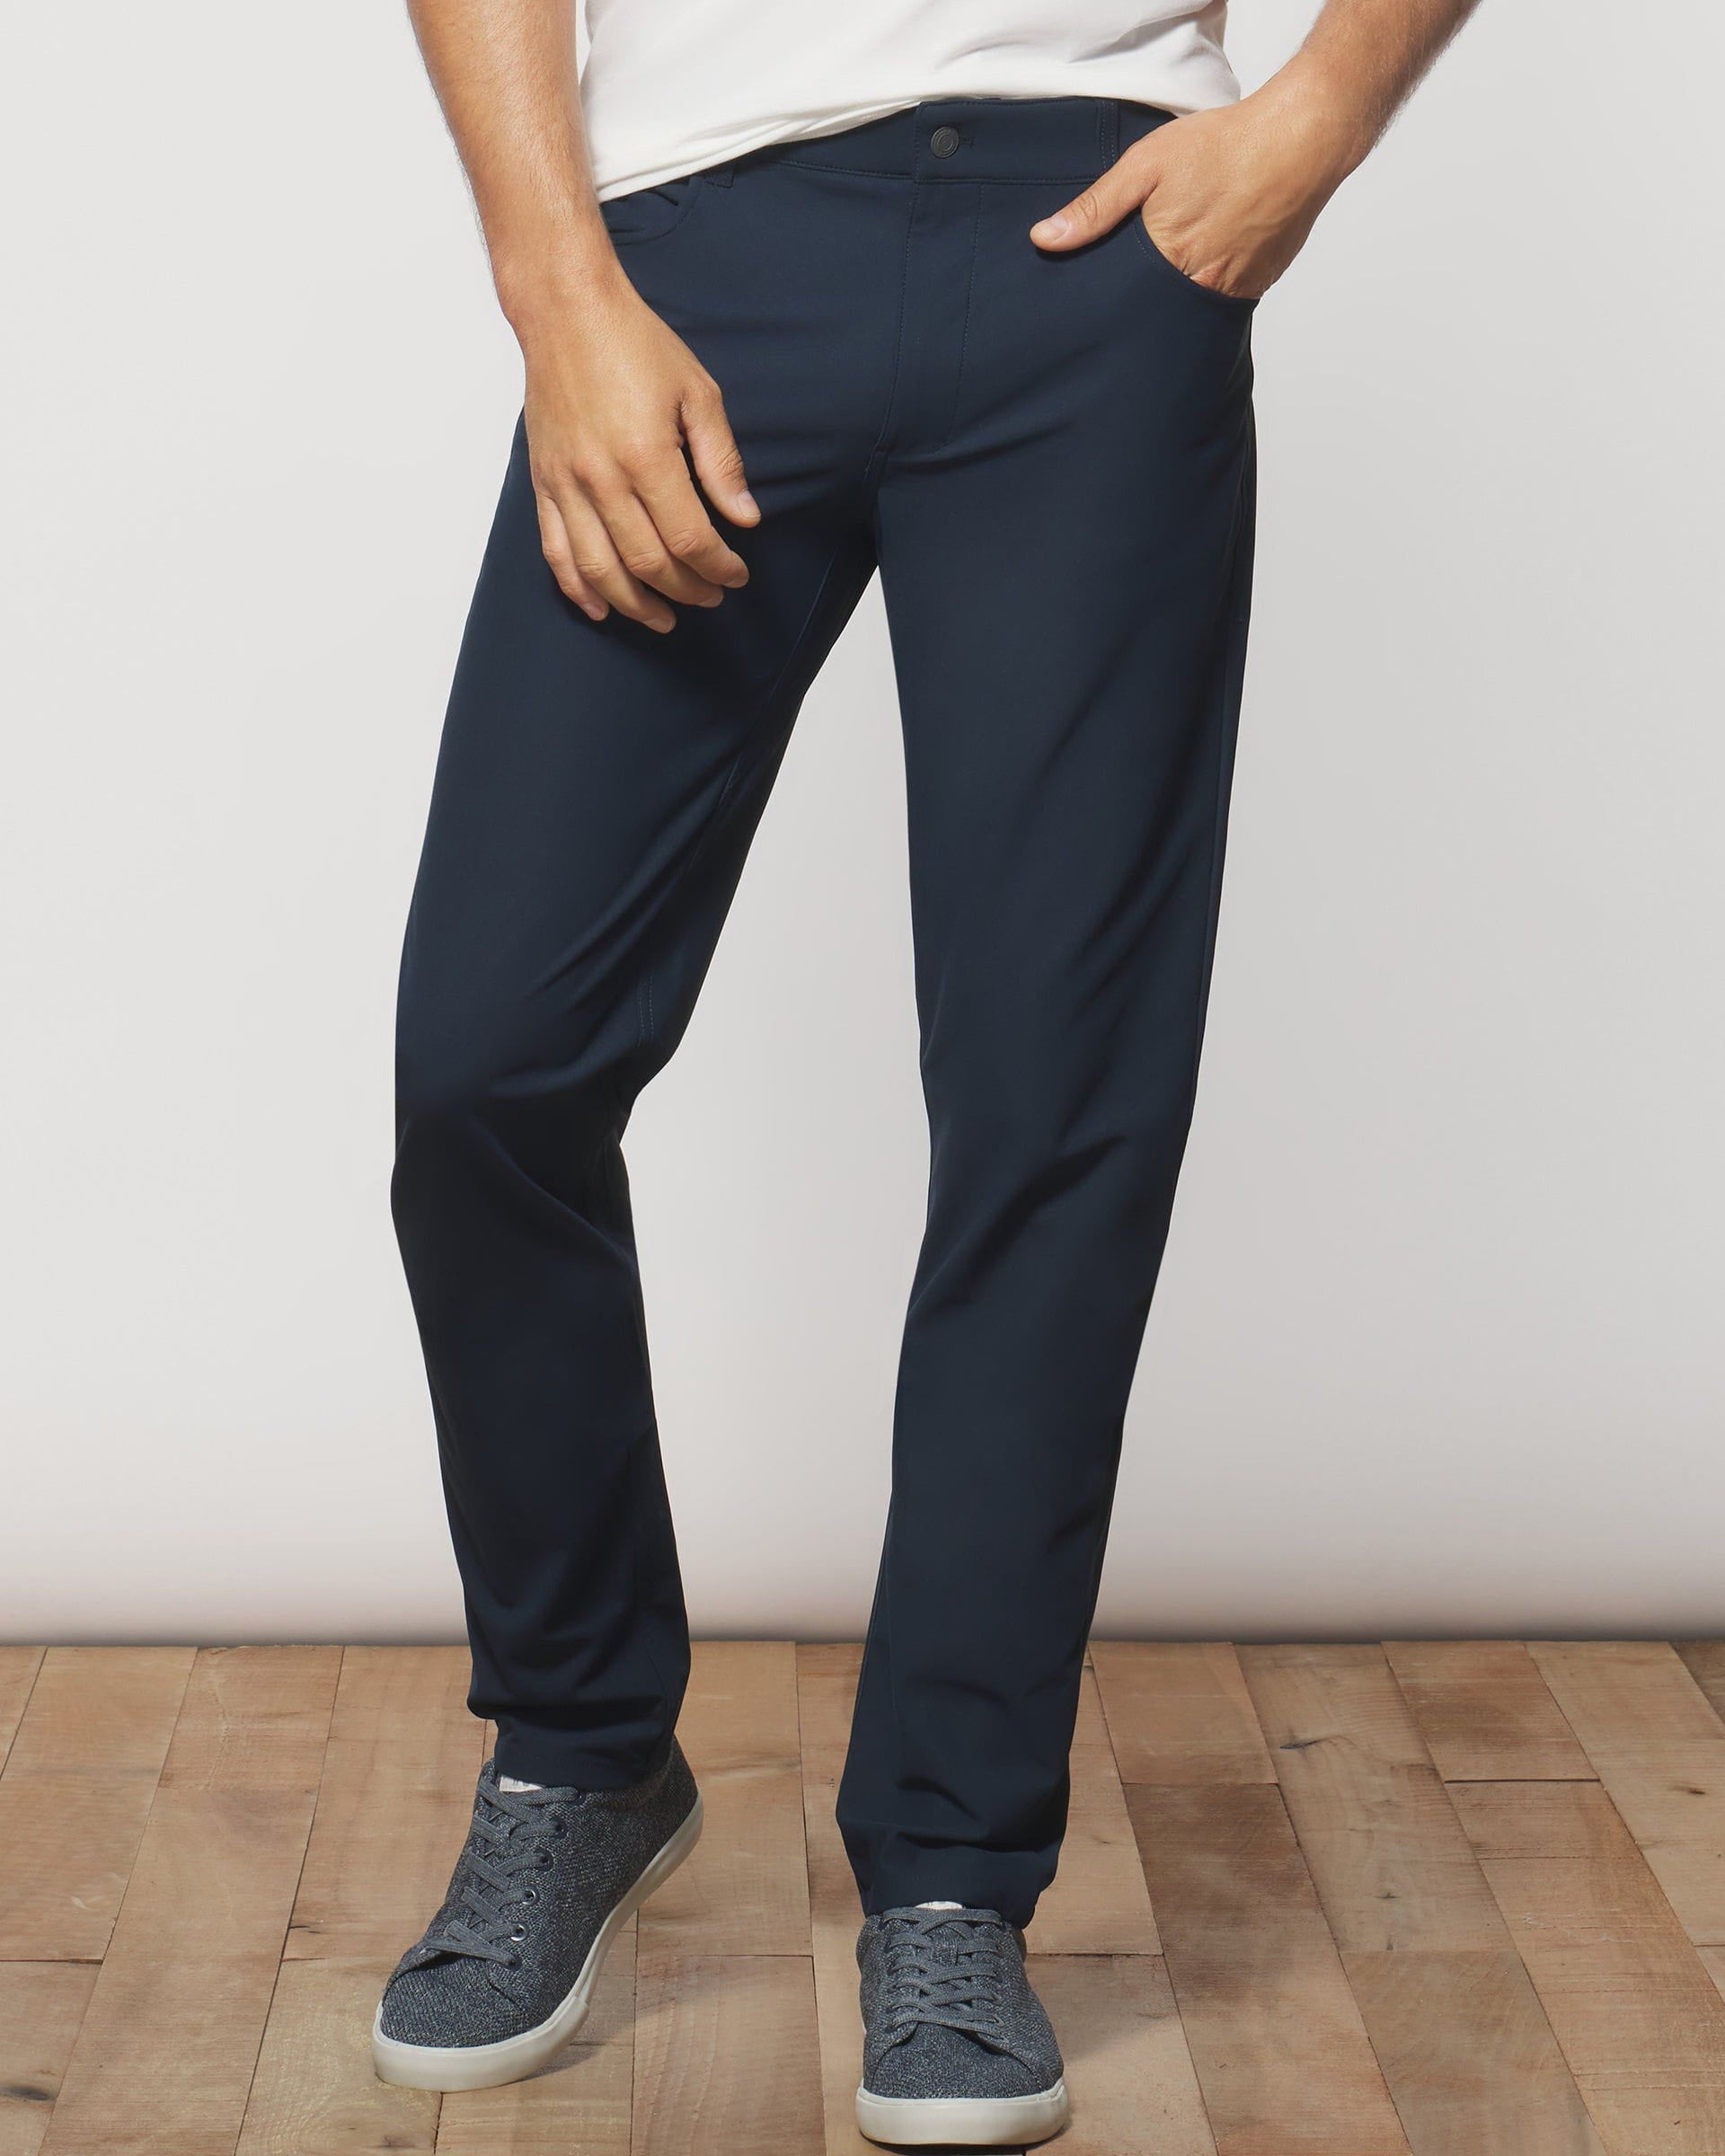 Commission Golf Pant 30, classic navy